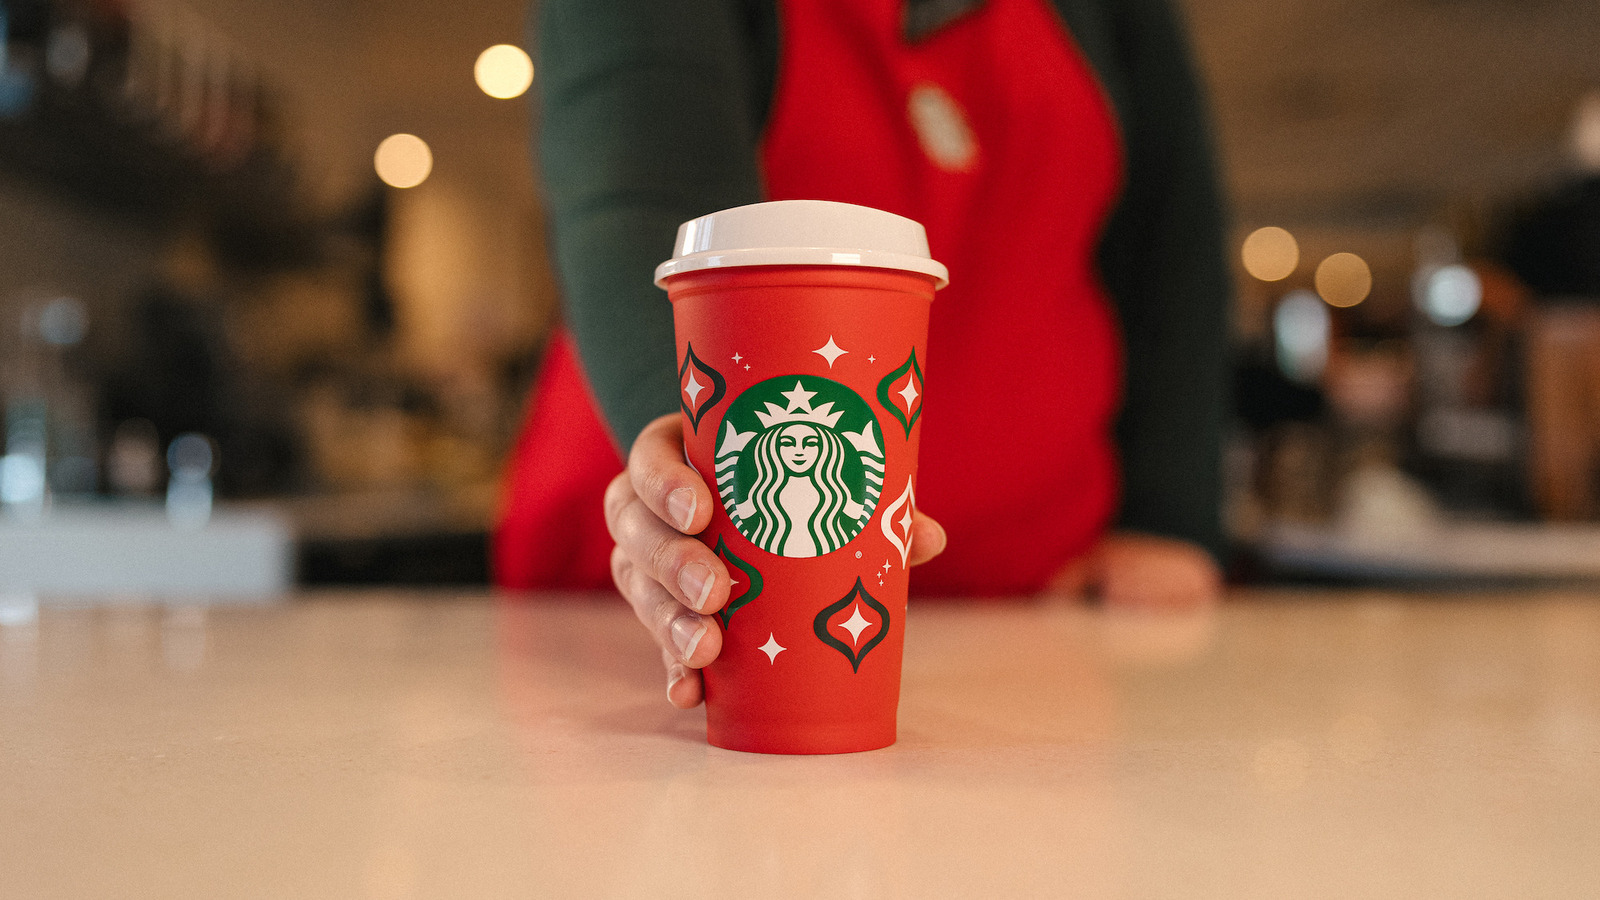 https://www.foodrepublic.com/img/gallery/how-to-score-a-free-starbucks-red-reusable-holiday-cup/l-intro-1700065484.jpg